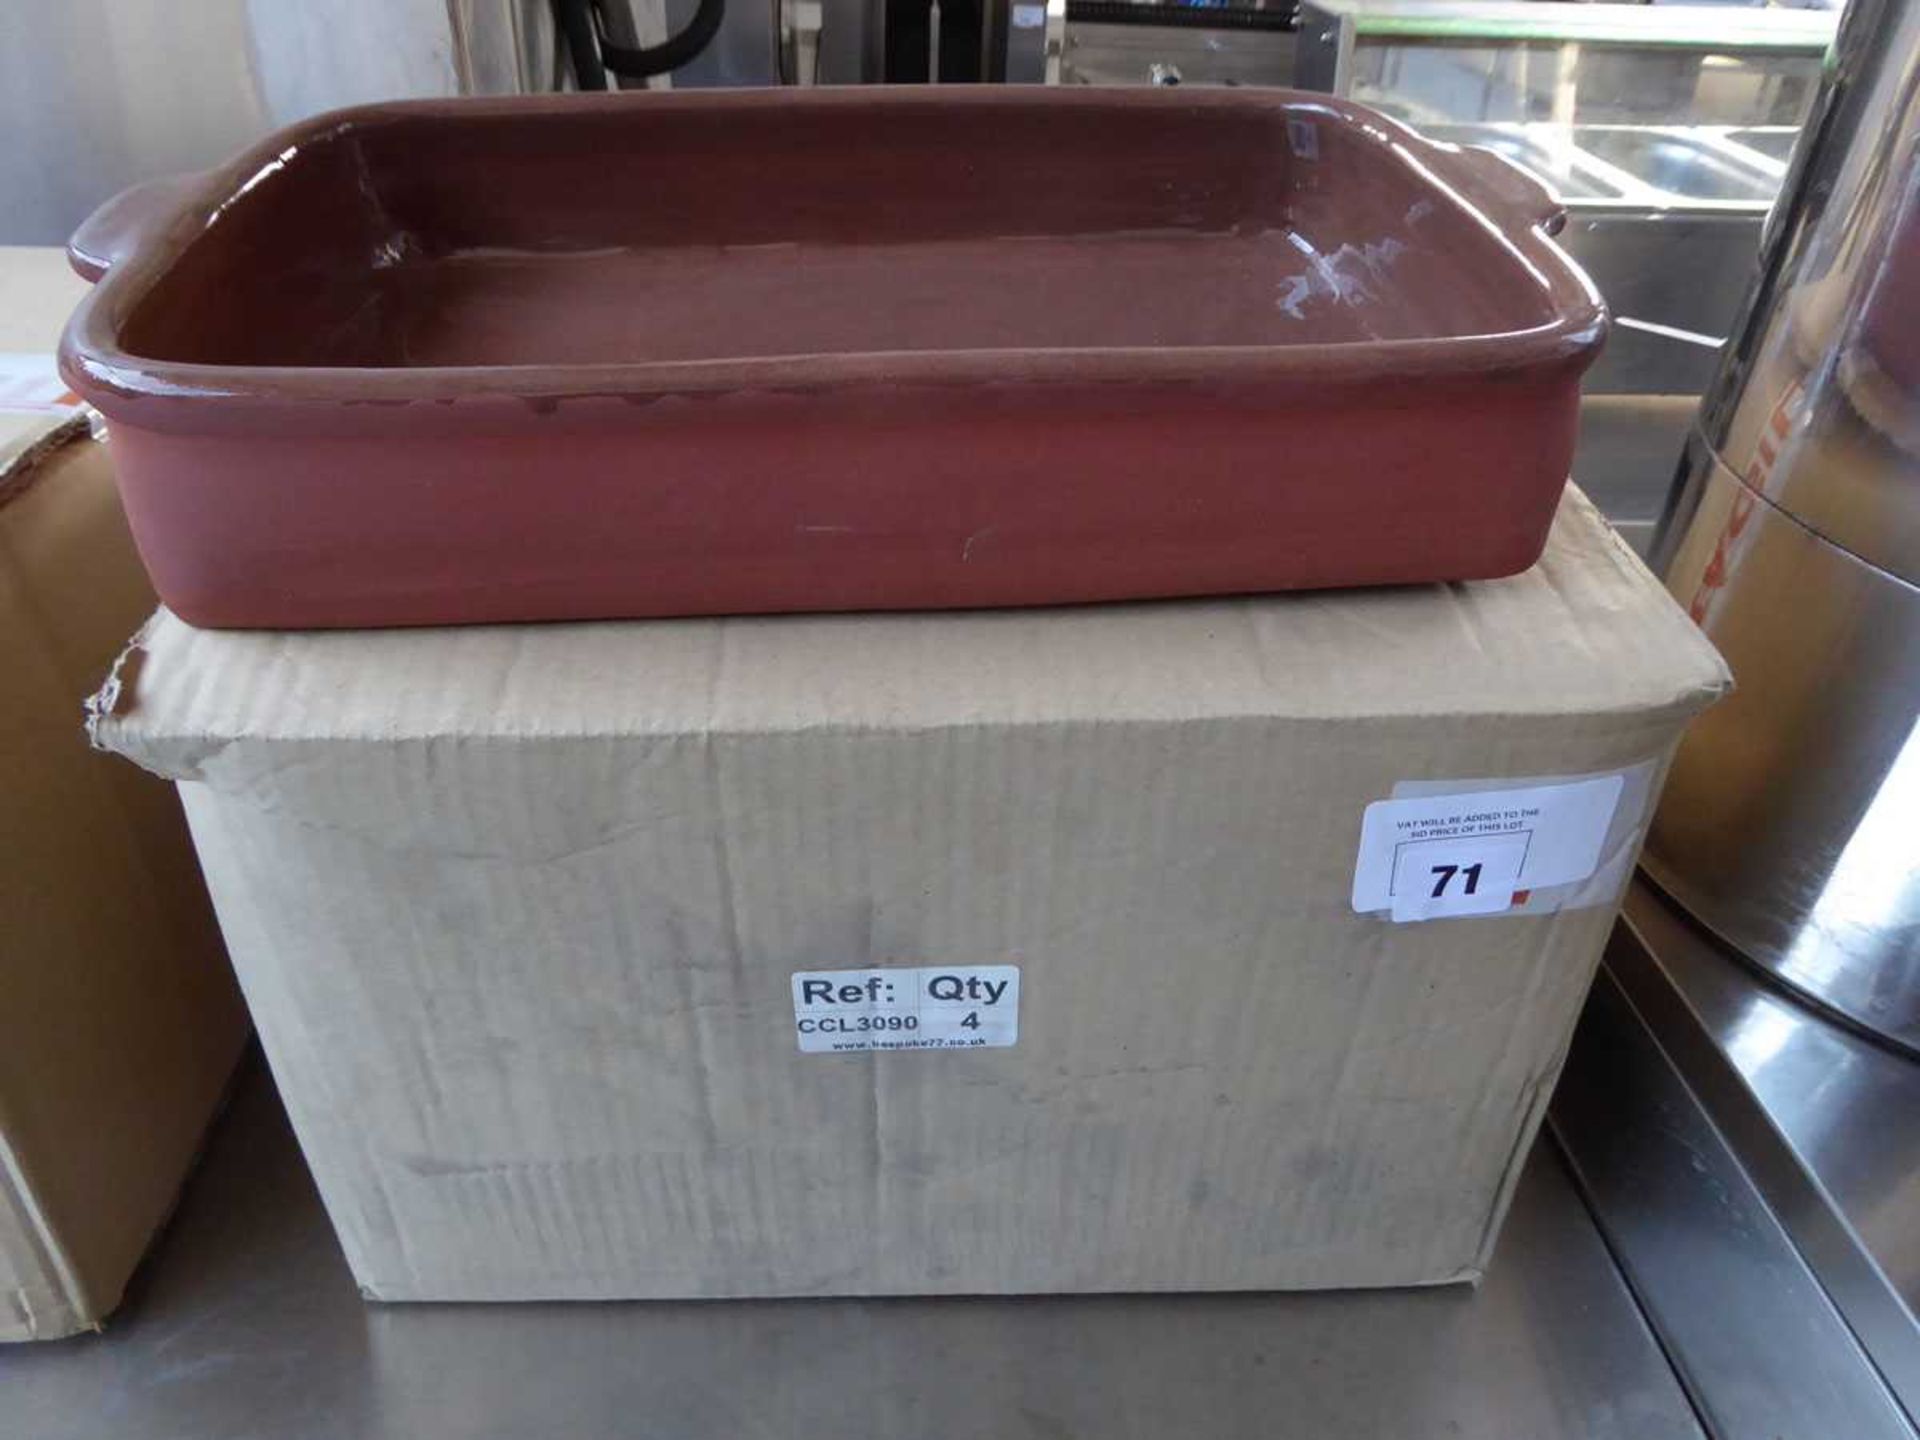 Box containing 4 large rectangular oven dishes